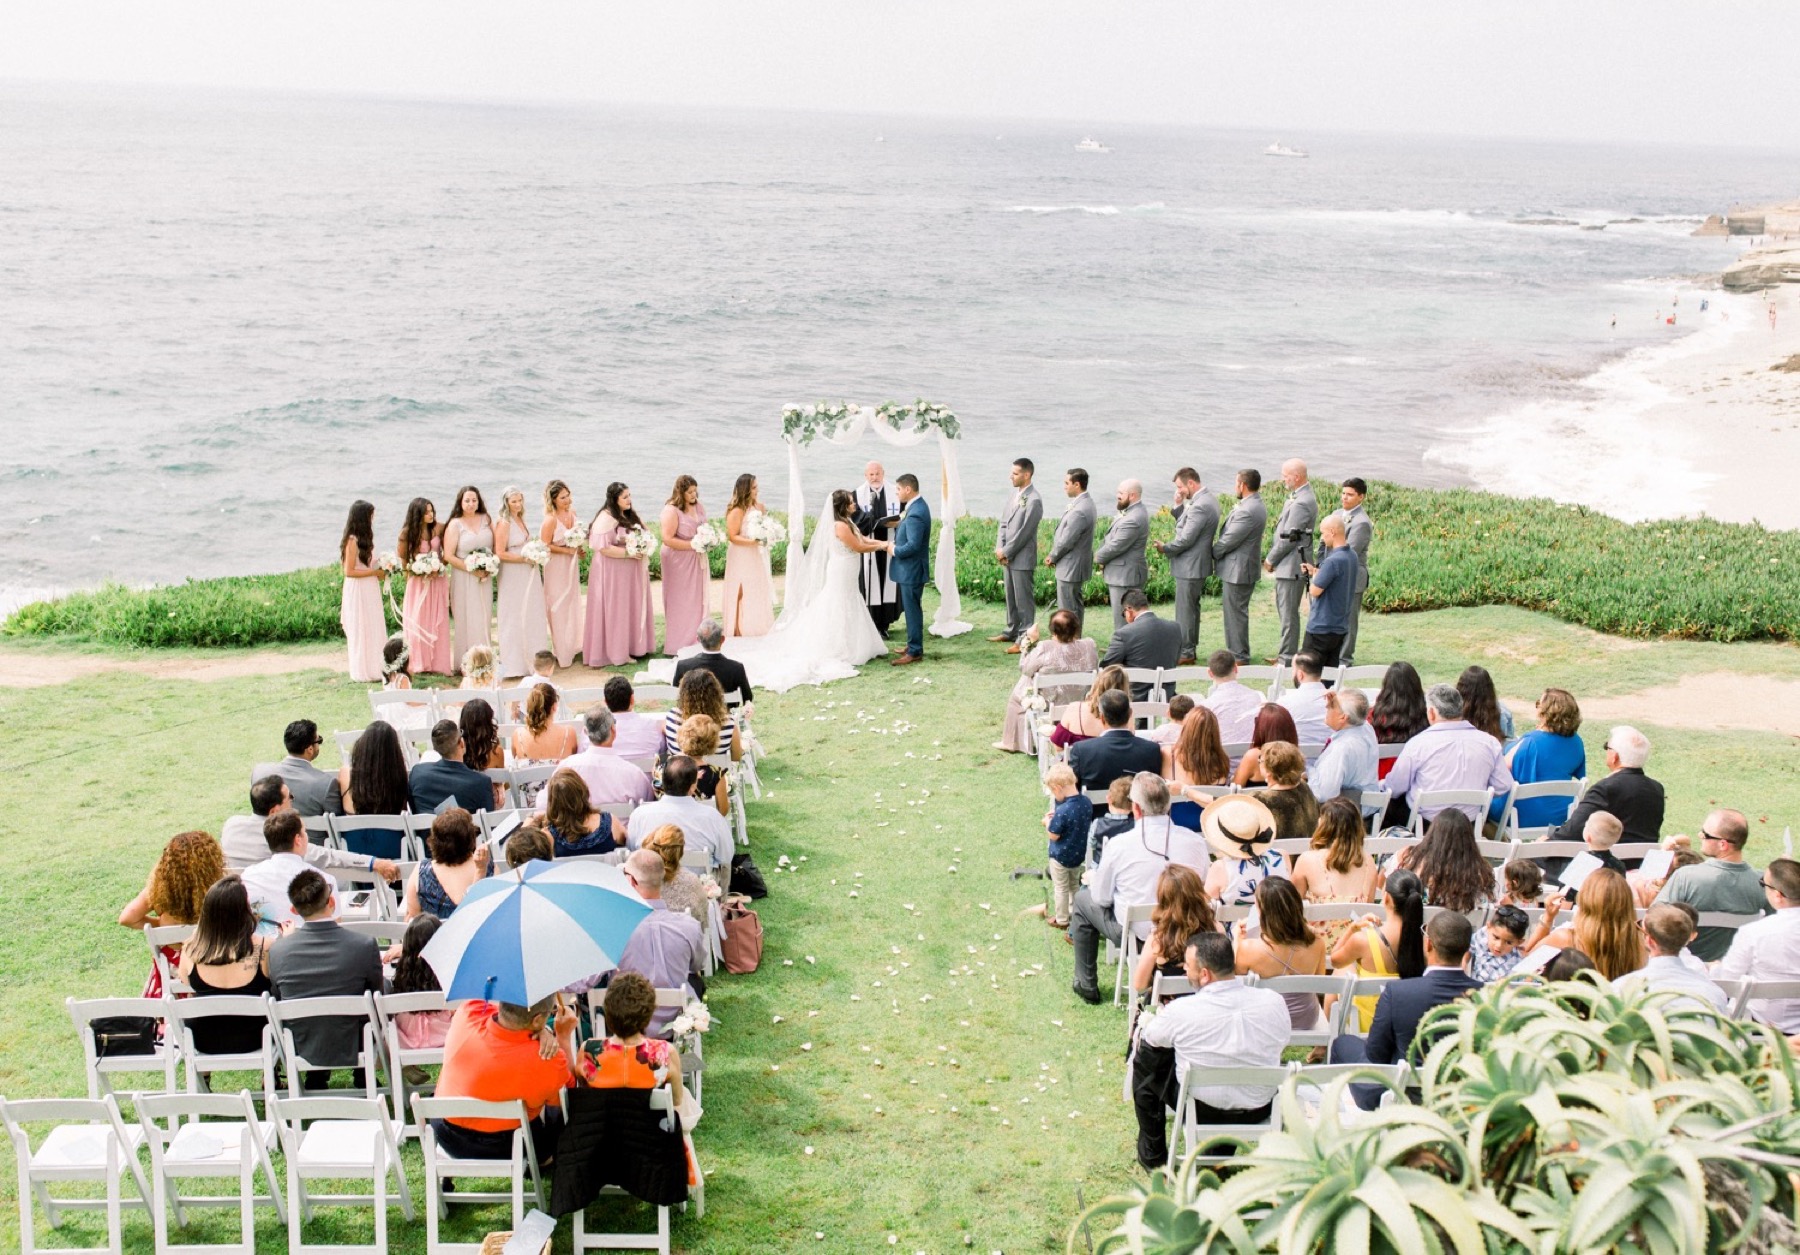 Summer Wedding at Cuvier Park, Cuvier Park summer wedding, La Jolla Wedding, La Jolla wedding ideas, San Diego Wedding, Summer wedding in San Diego, Outdoor ceremony area in San Diego, Summer outdoor venues in La Jolla, Intimate classy wedding venues in San Diego, La Jolla intimate venues, Cuvier park wedding venues, wedding venues in San Diego, Northern San Diego venues, Coastal San Diego Wedding, The Wedding Bowl Wedding, Wedding venues in San Diego with a ocean view,